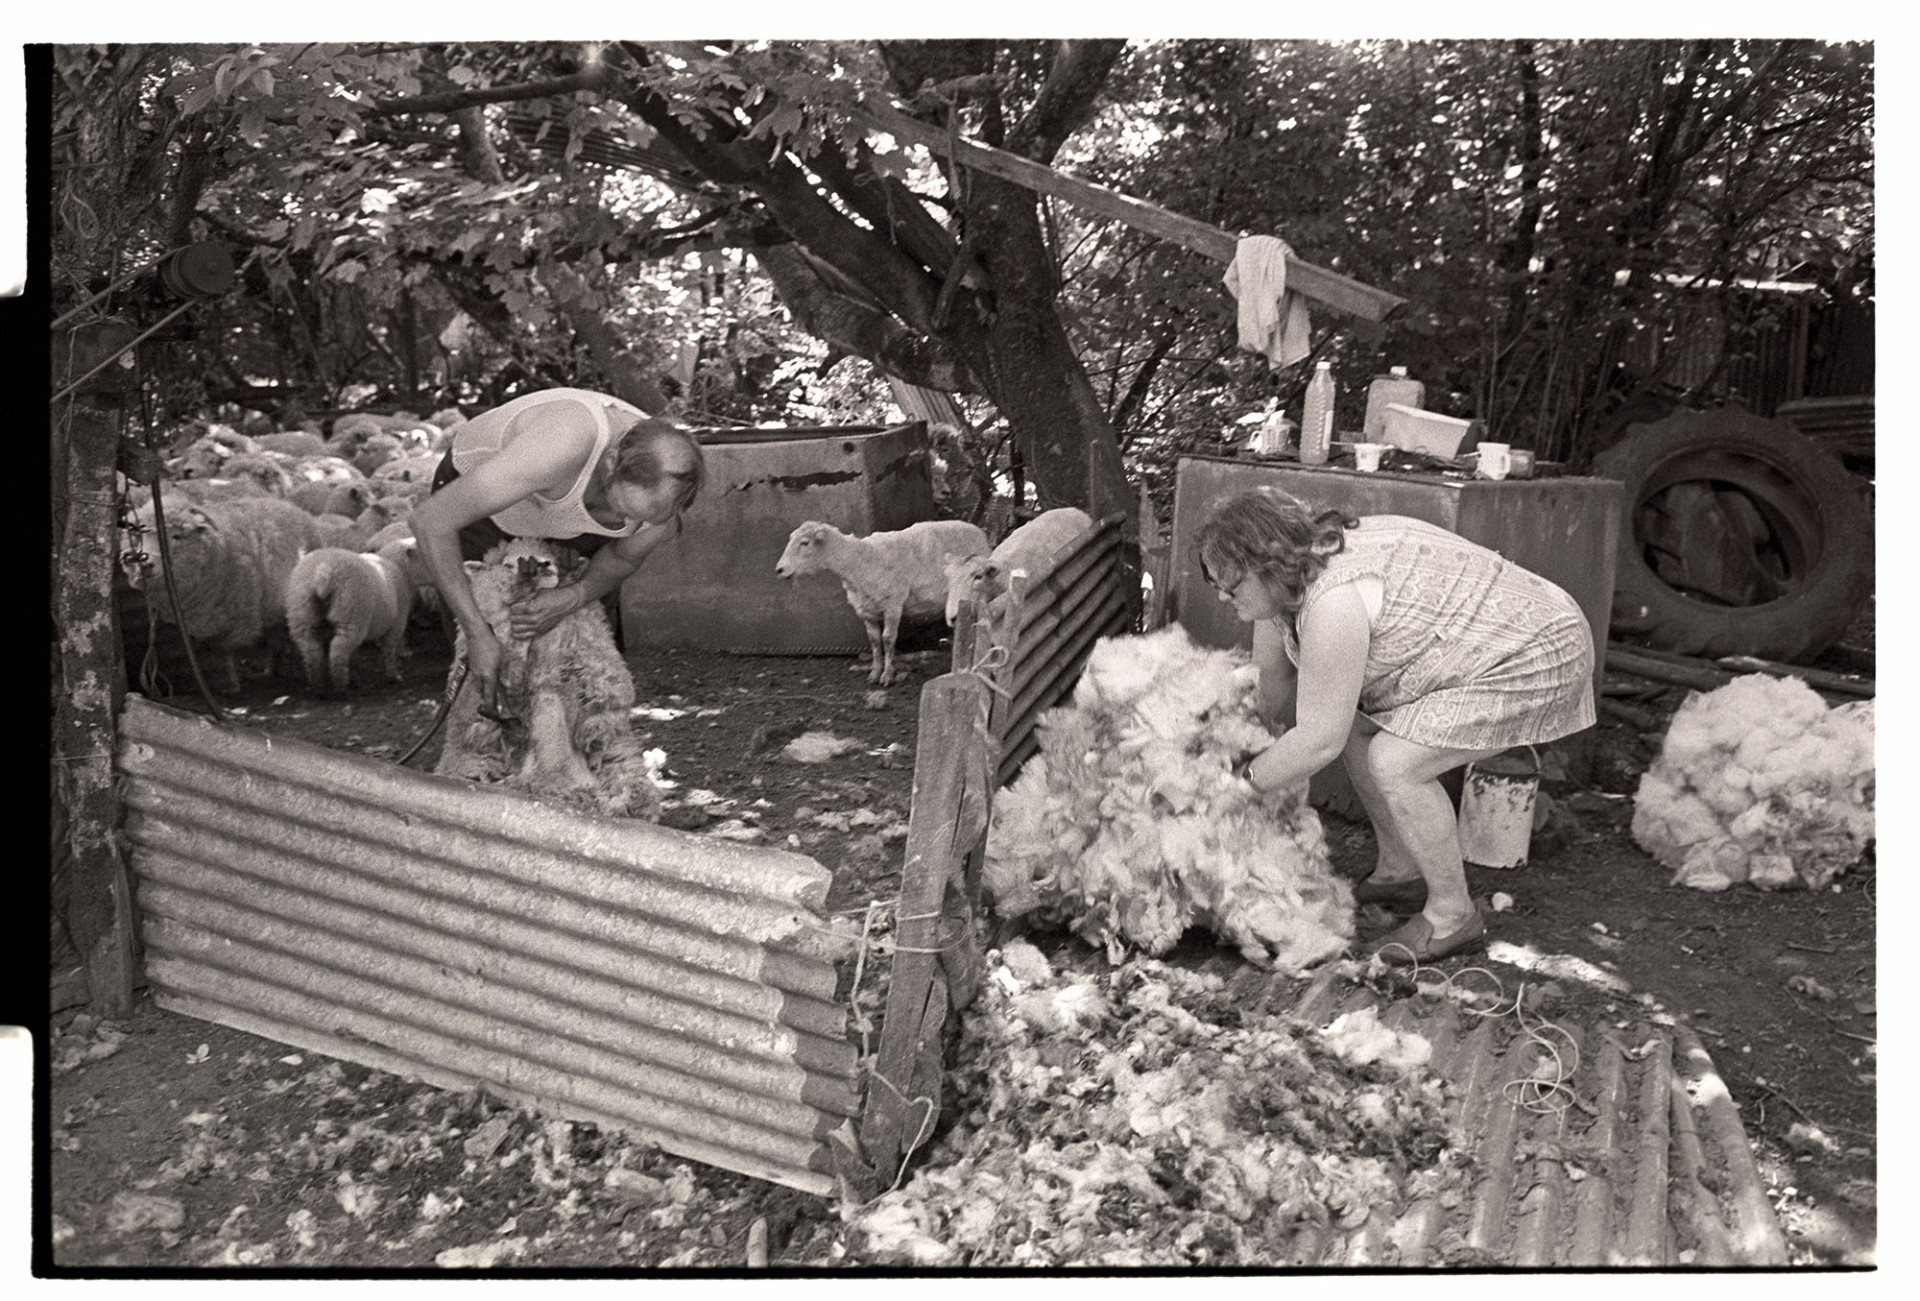 Farmer shearing sheep under tree, woman farmer bundling up fleeces. 
[Cyril Bennet shearing sheep in a corrugated iron pen under trees. Olive Bennett is bundling up the fleeces by the pen.]